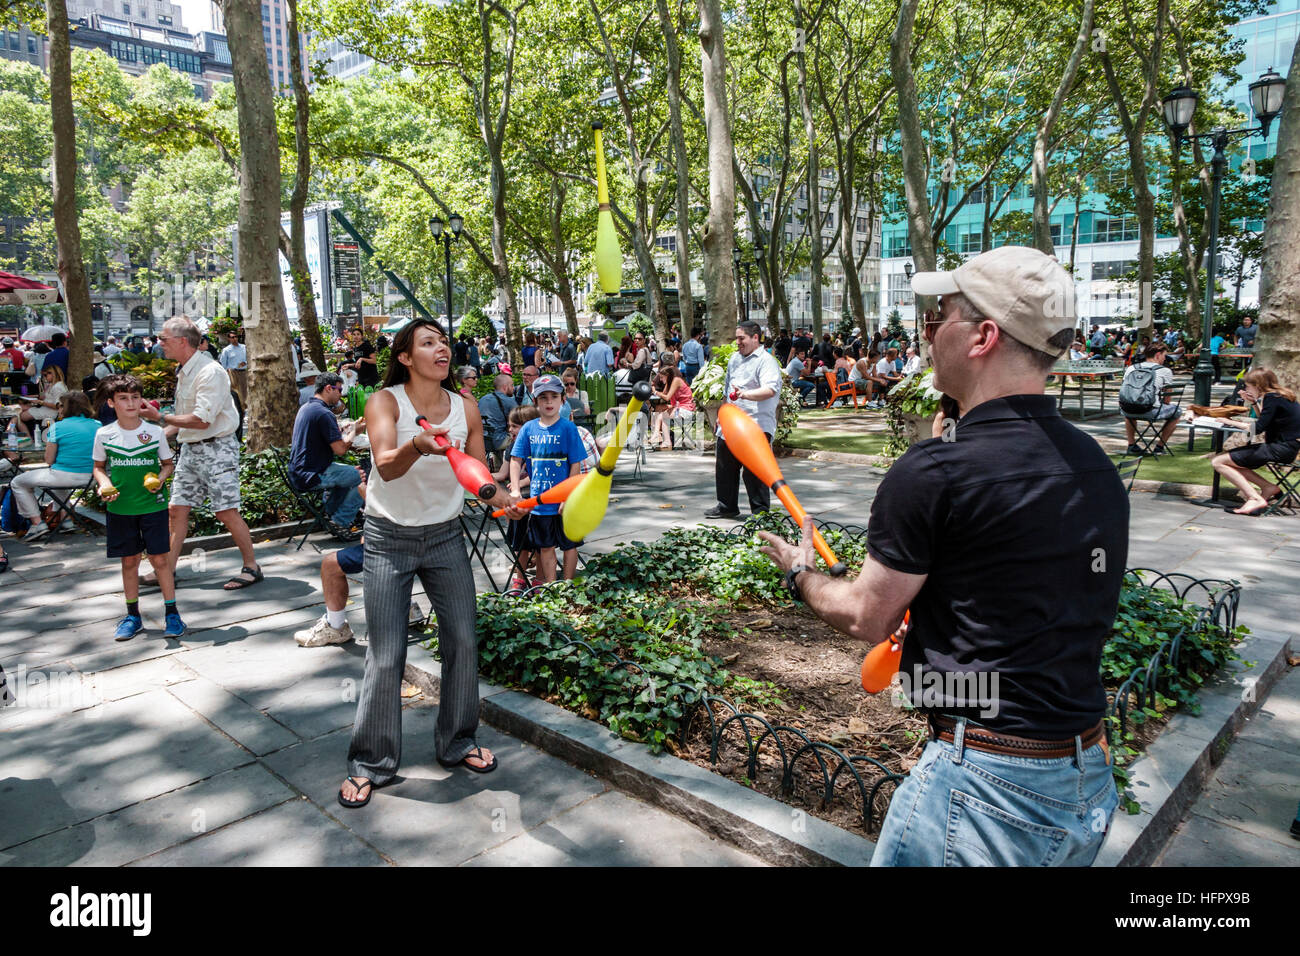 New York City,NY NYC Manhattan,Midtown,Bryant Park,public park,upper terrace,lunch crowd,adult,adults,man men male,woman female women,juggling,free cl Stock Photo